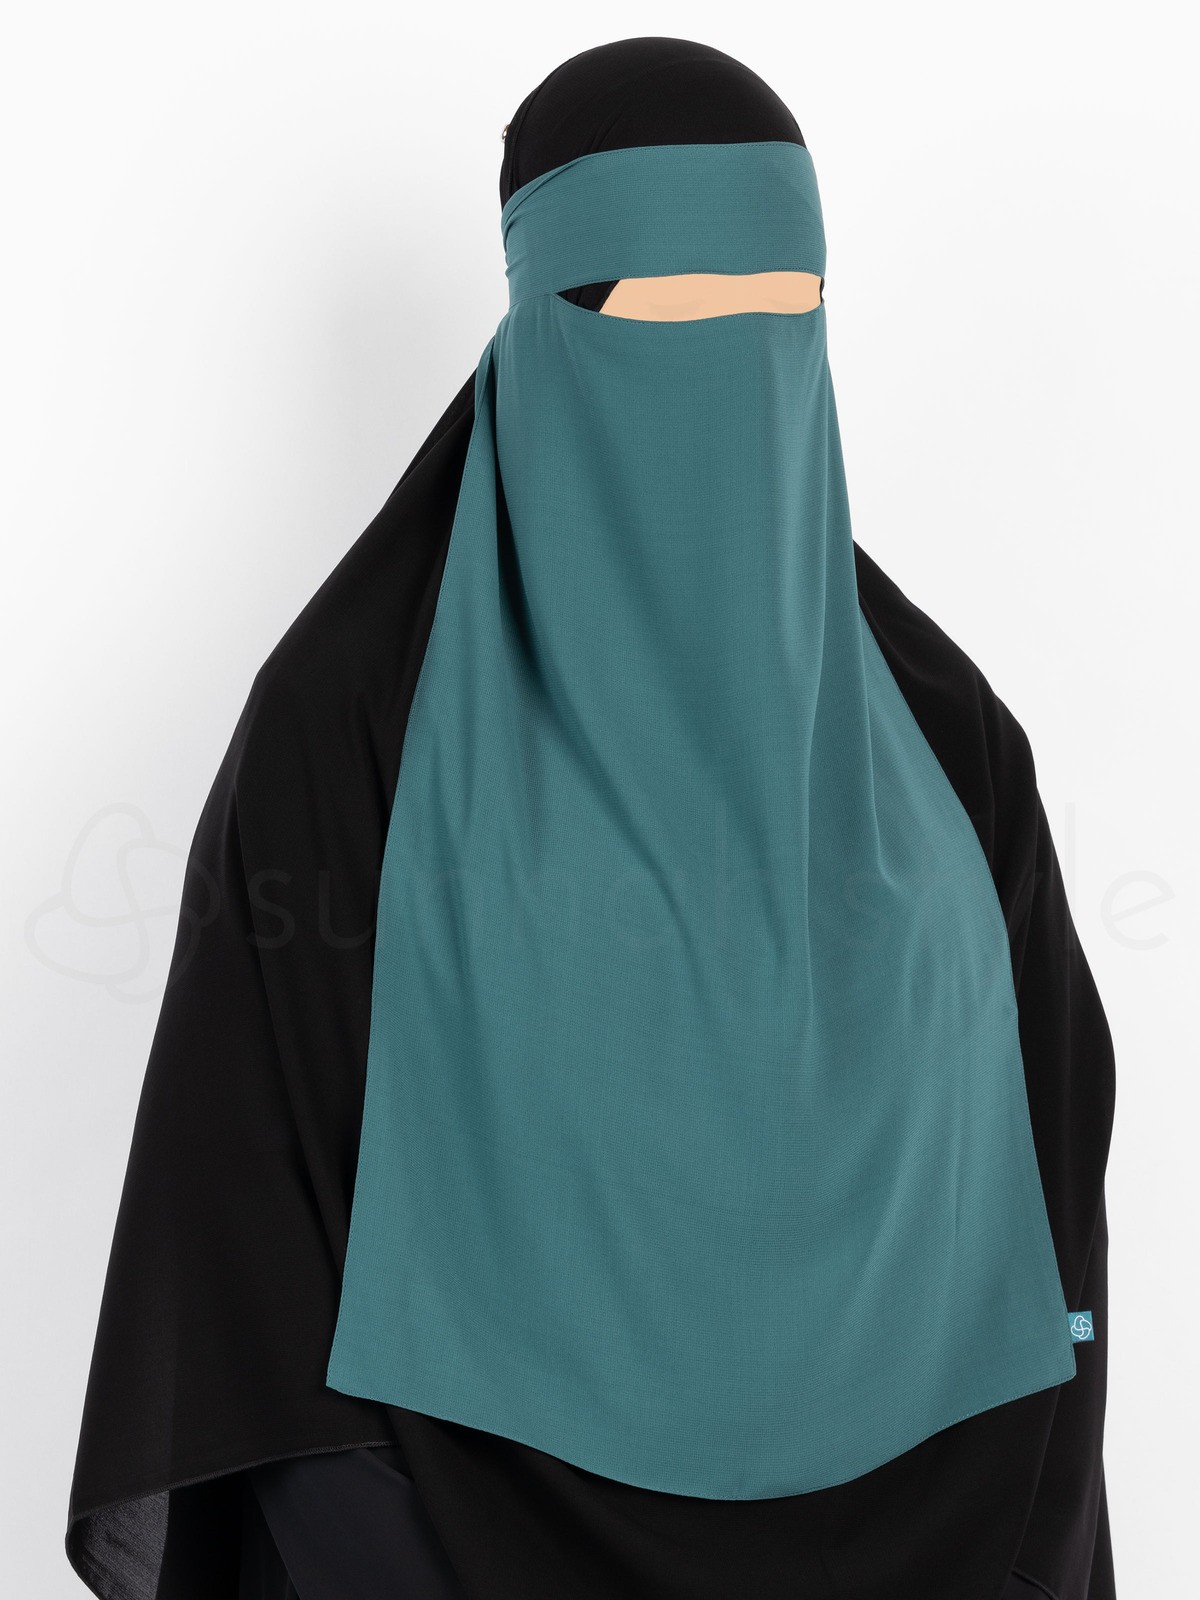 Sunnah Style - Long One Layer Niqab (Teal)